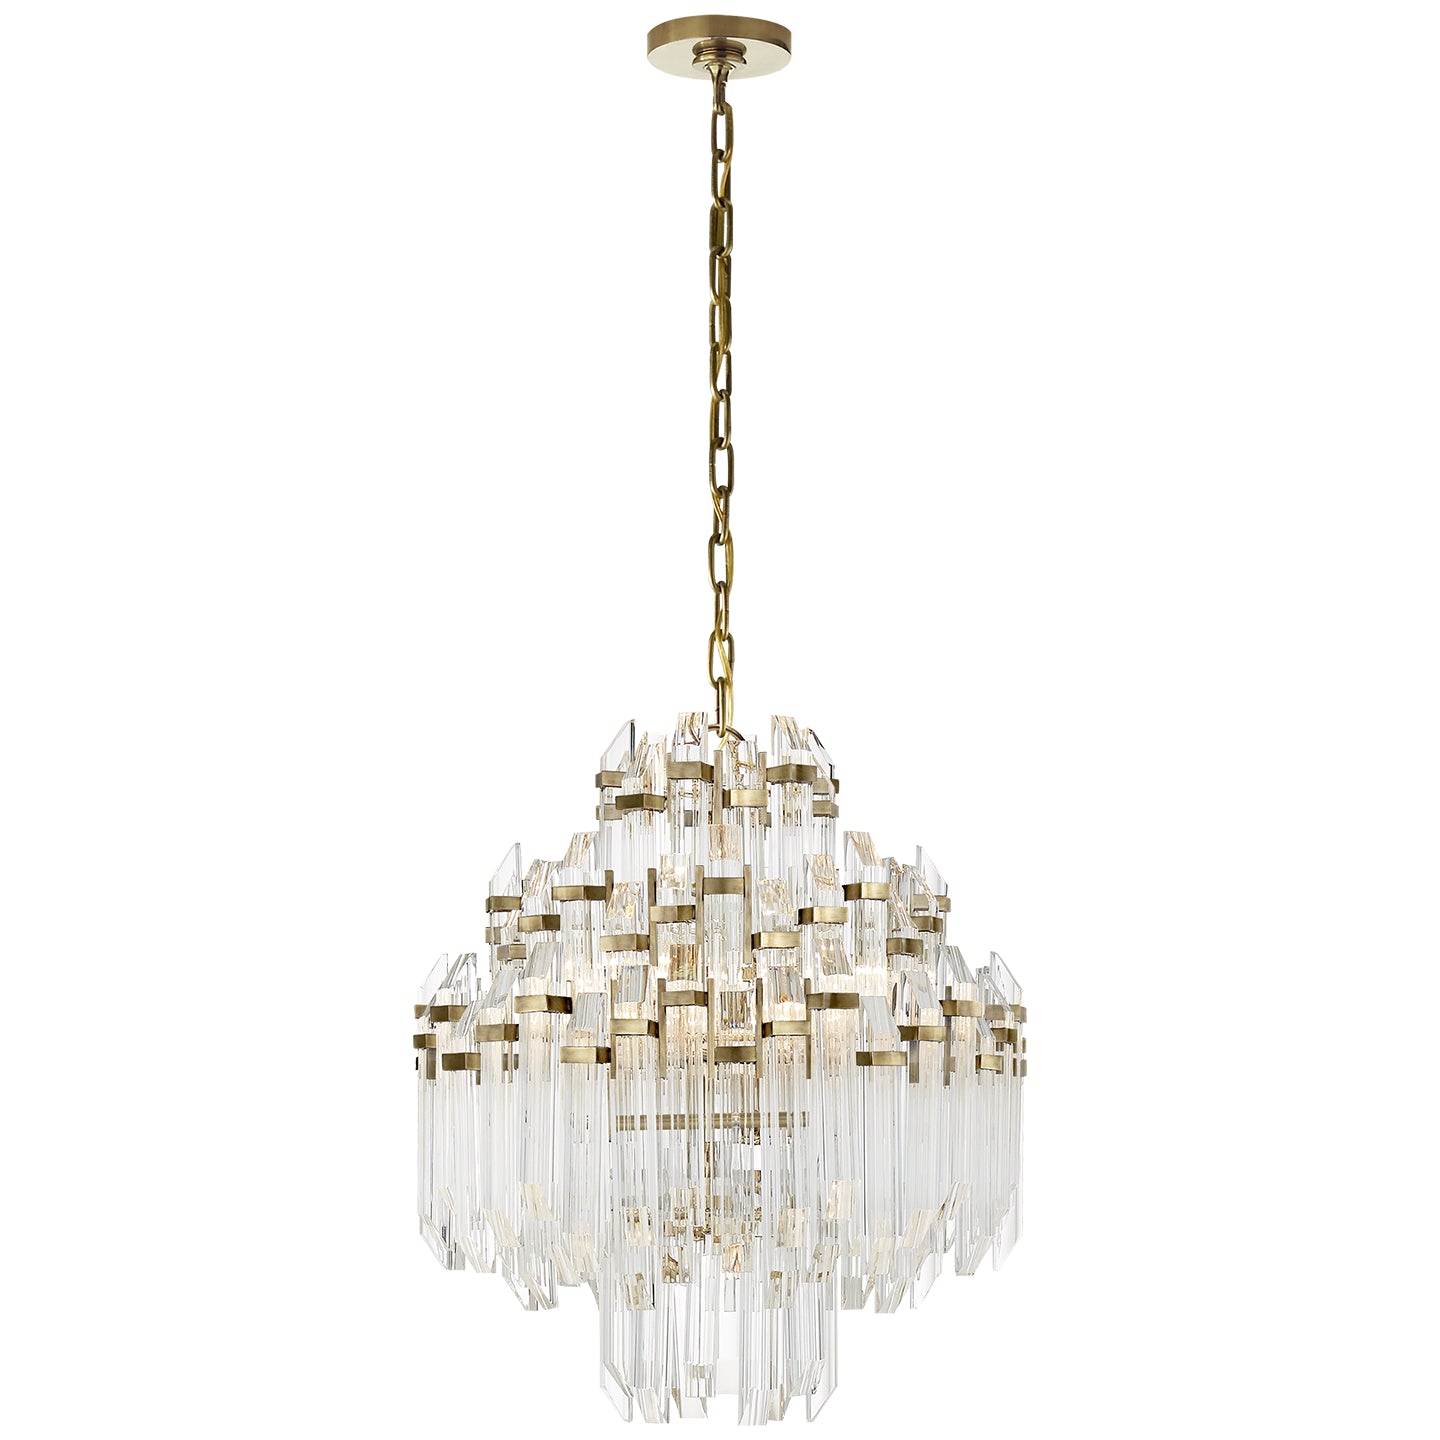 Visual Comfort Signature Canada - Six Light Chandelier - Adele - Hand-Rubbed Antique Brass with Clear Acrylic- Union Lighting Luminaires Decor